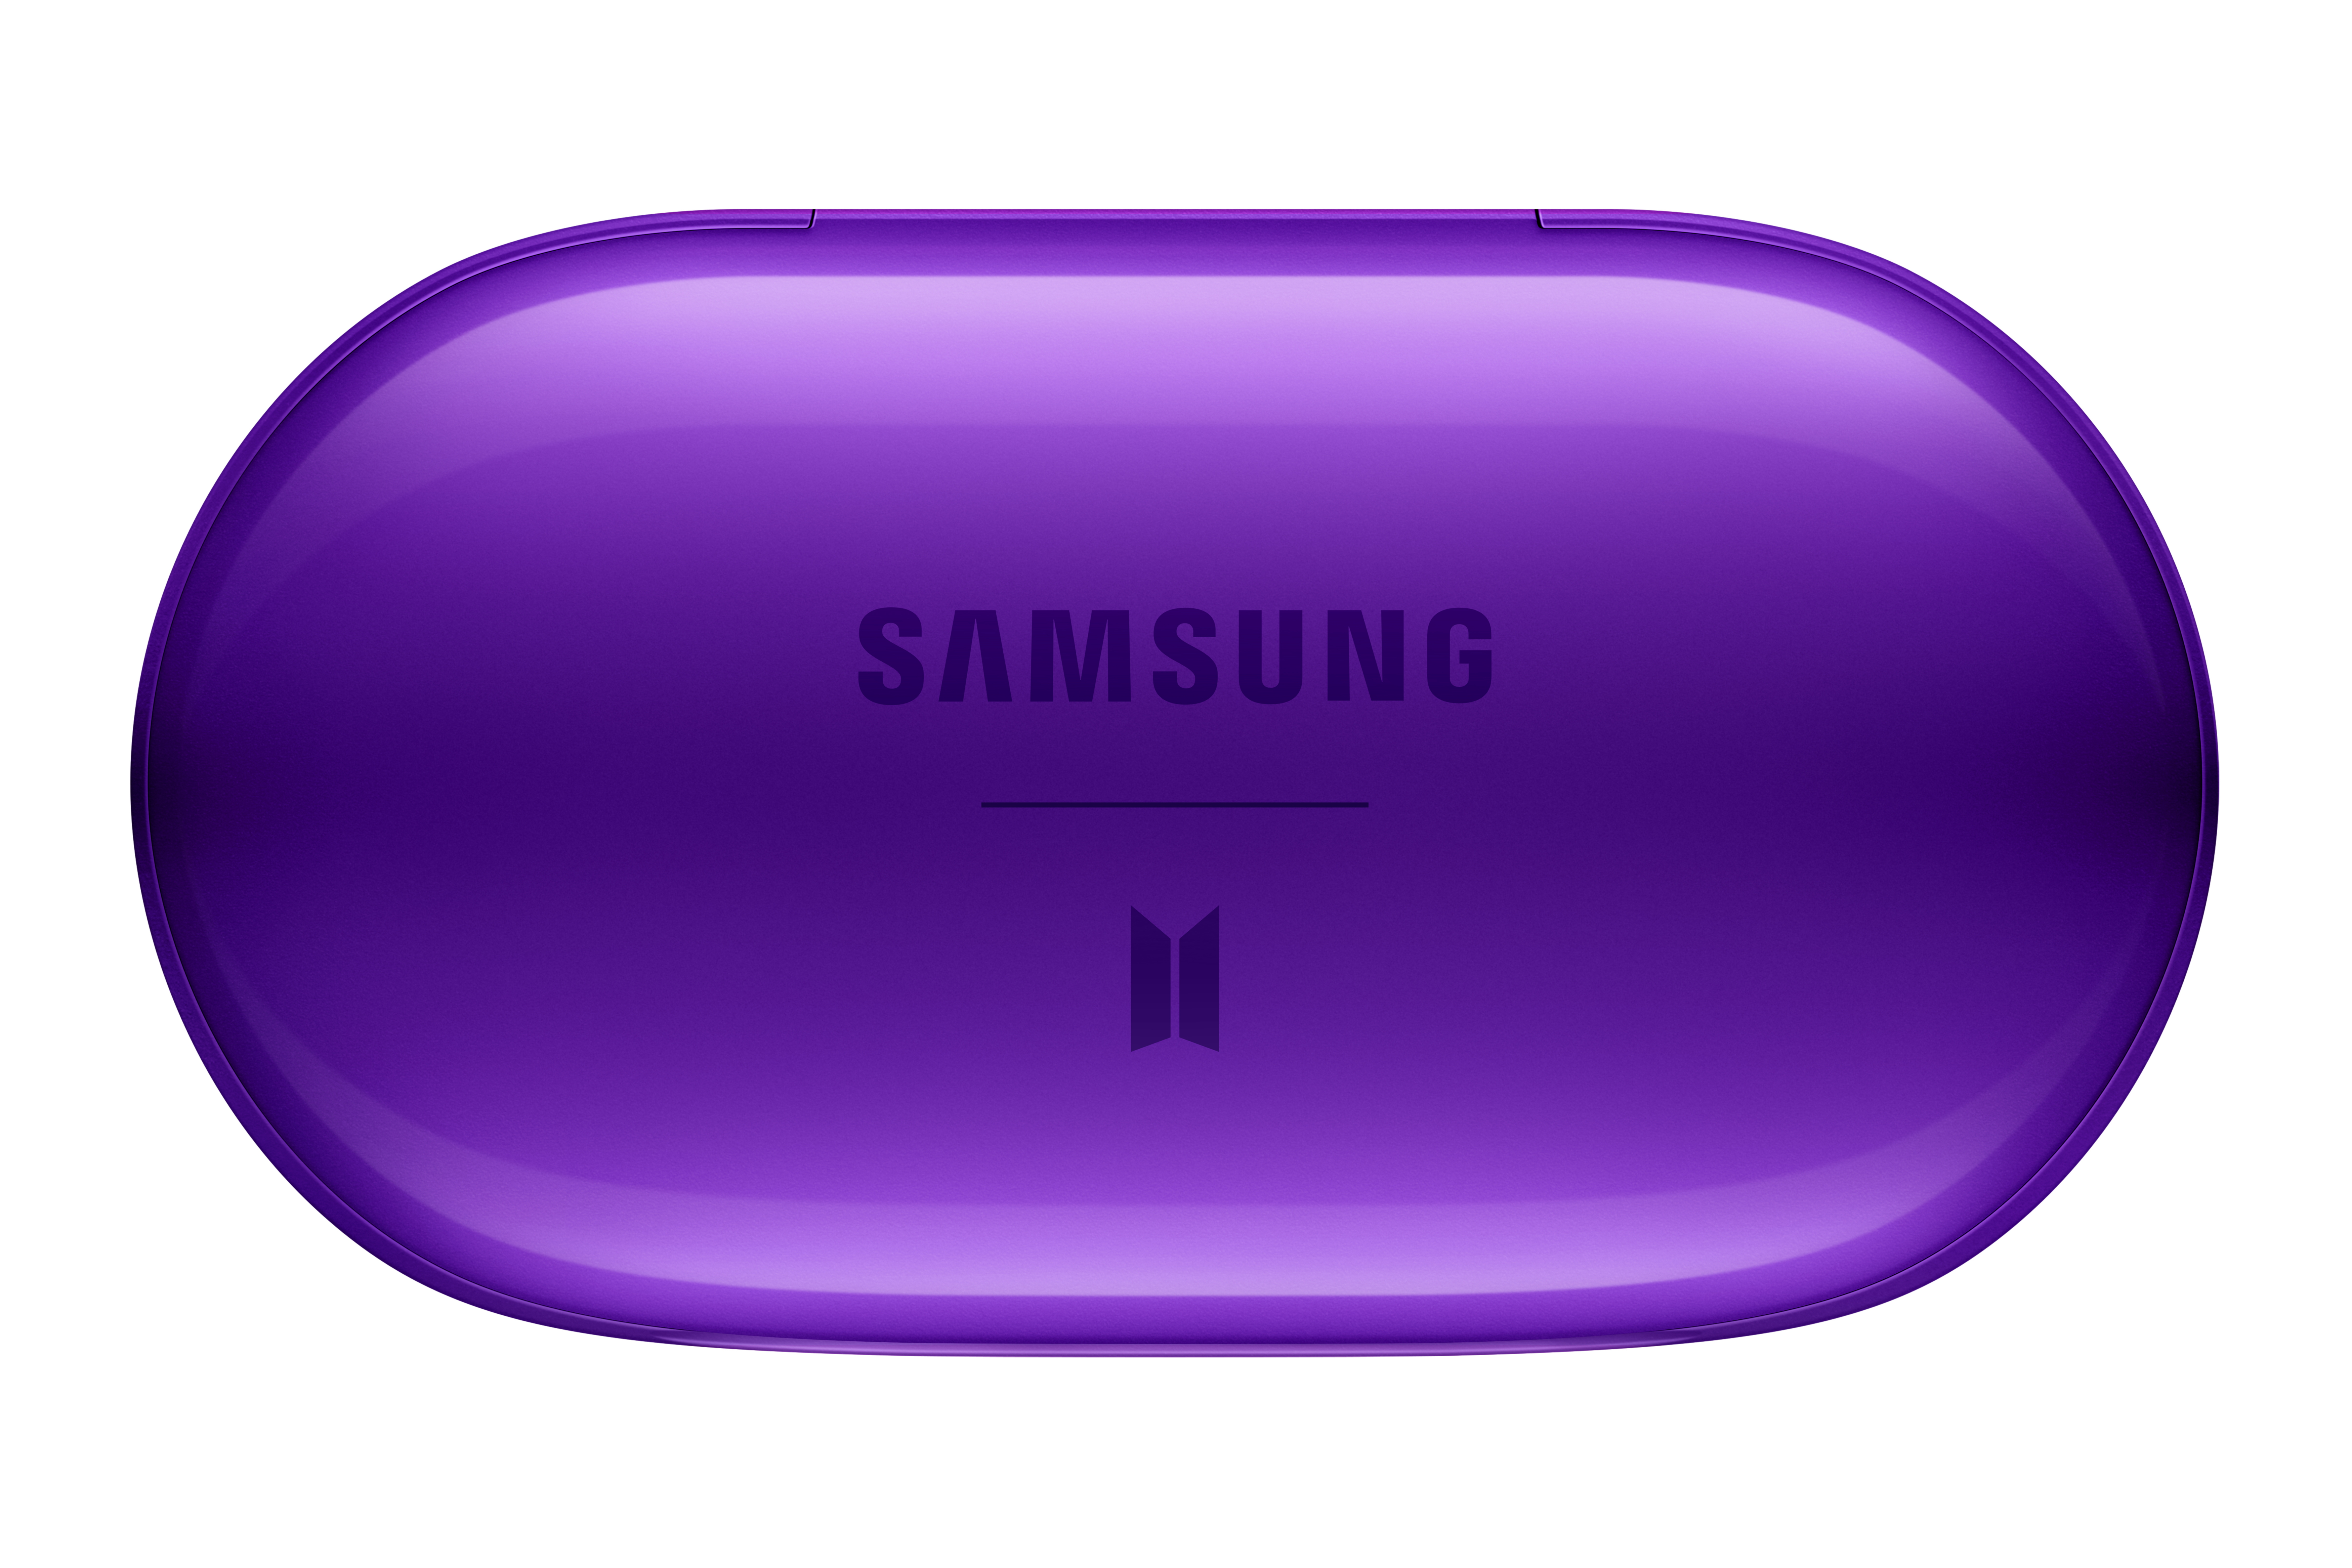 Samsung announces BTS Editions of the Galaxy S20+ and